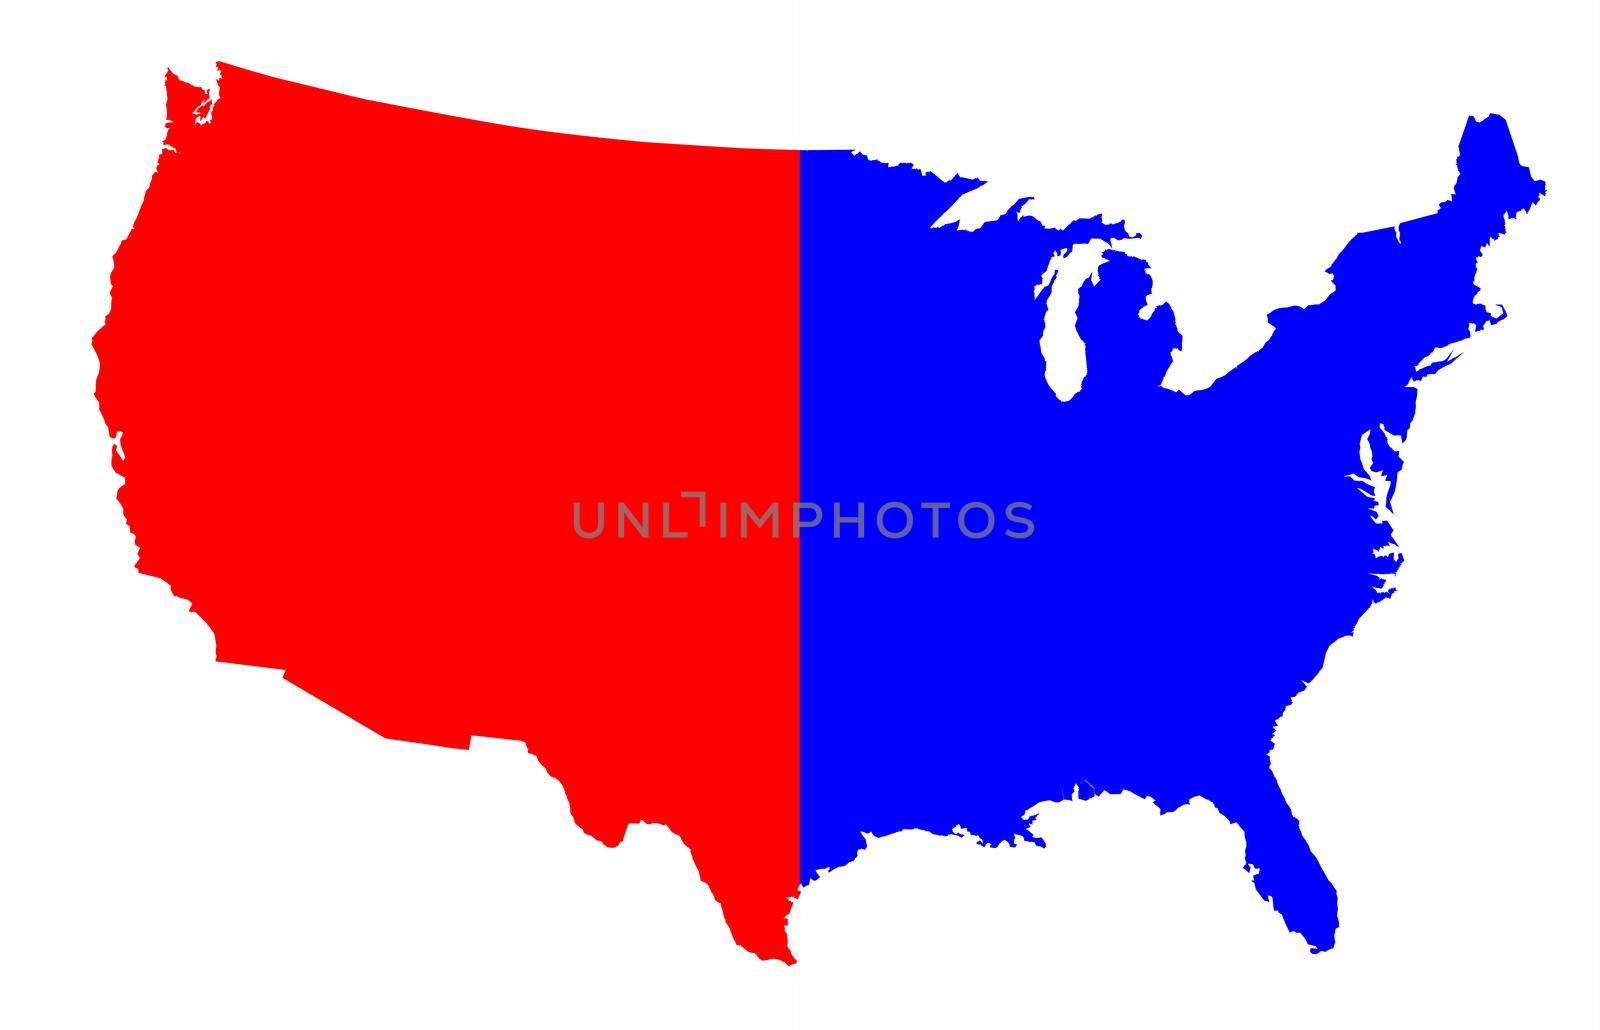 An outline silhouette map of The United States of America in red and blueover a white background